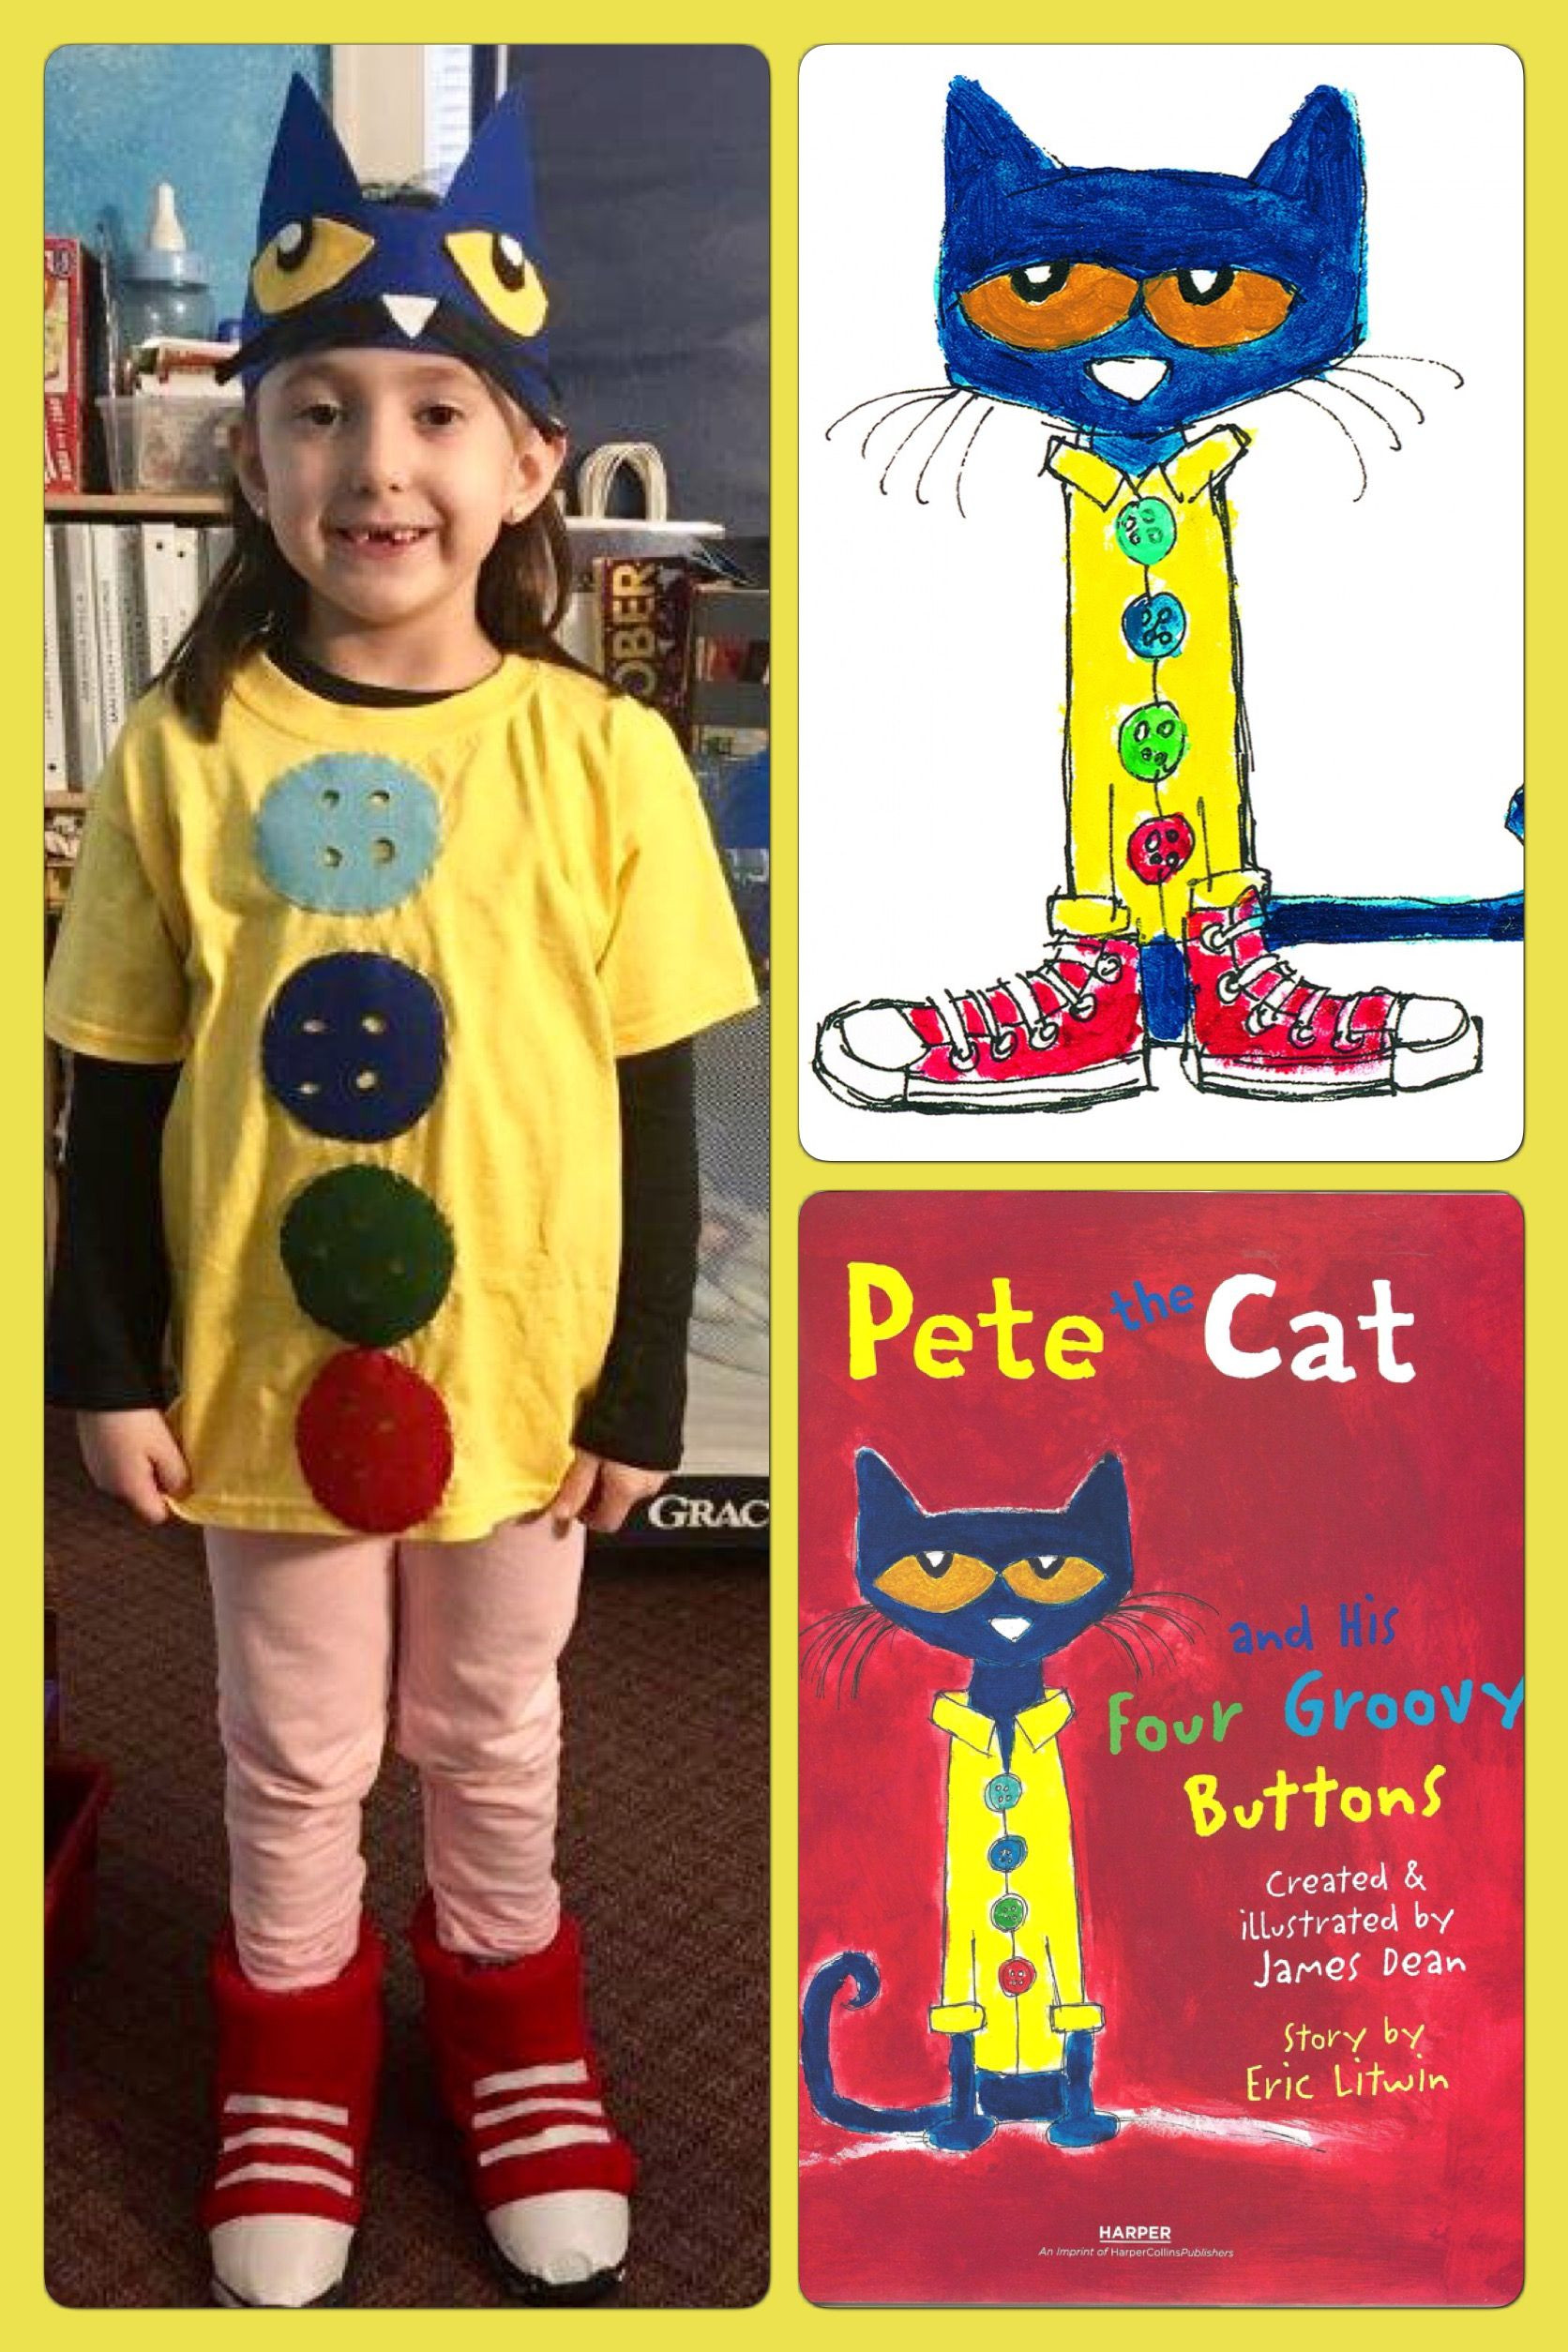 Pete The Cat Costume DIY
 Pete the cat 4 groovy buttons costume